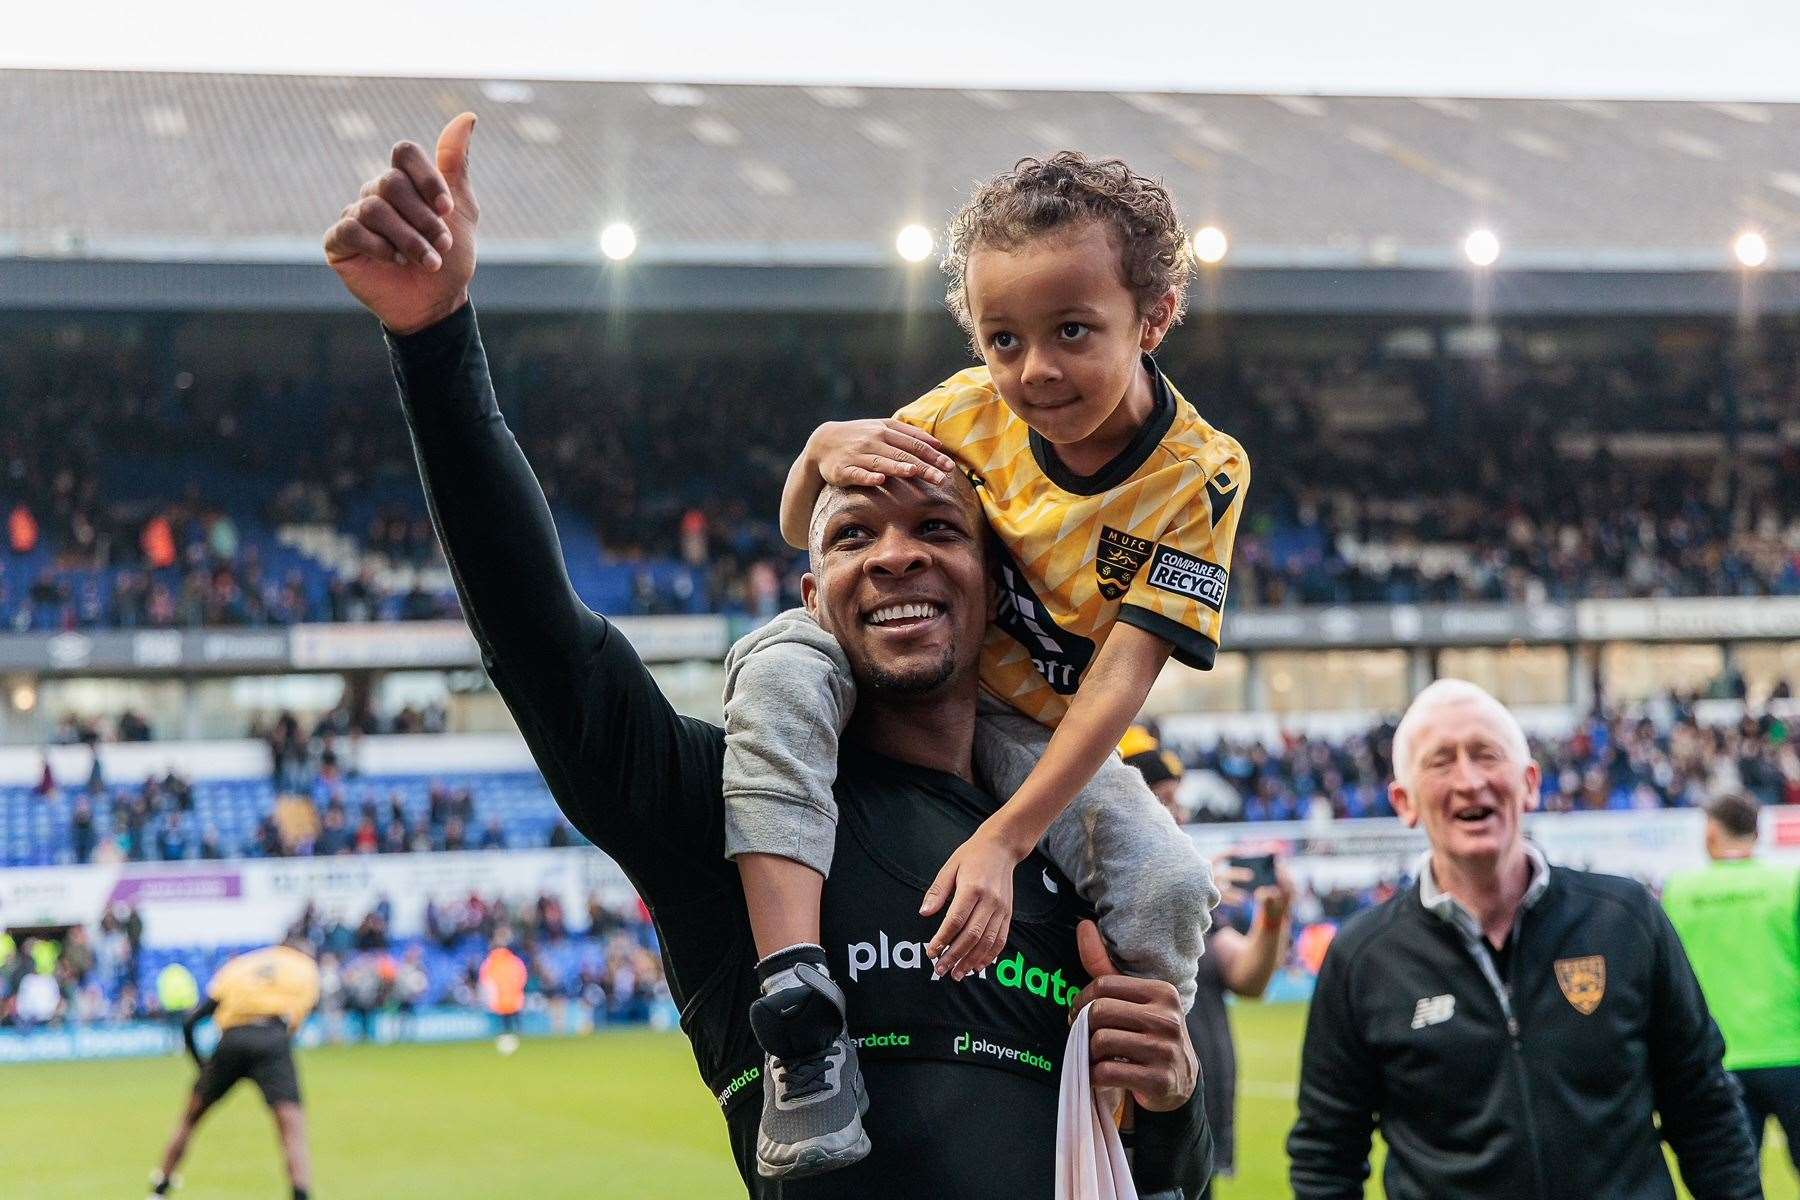 Maidstone captain Gavin Hoyte with his son on the pitch after beating Ipswich. Picture: Helen Cooper